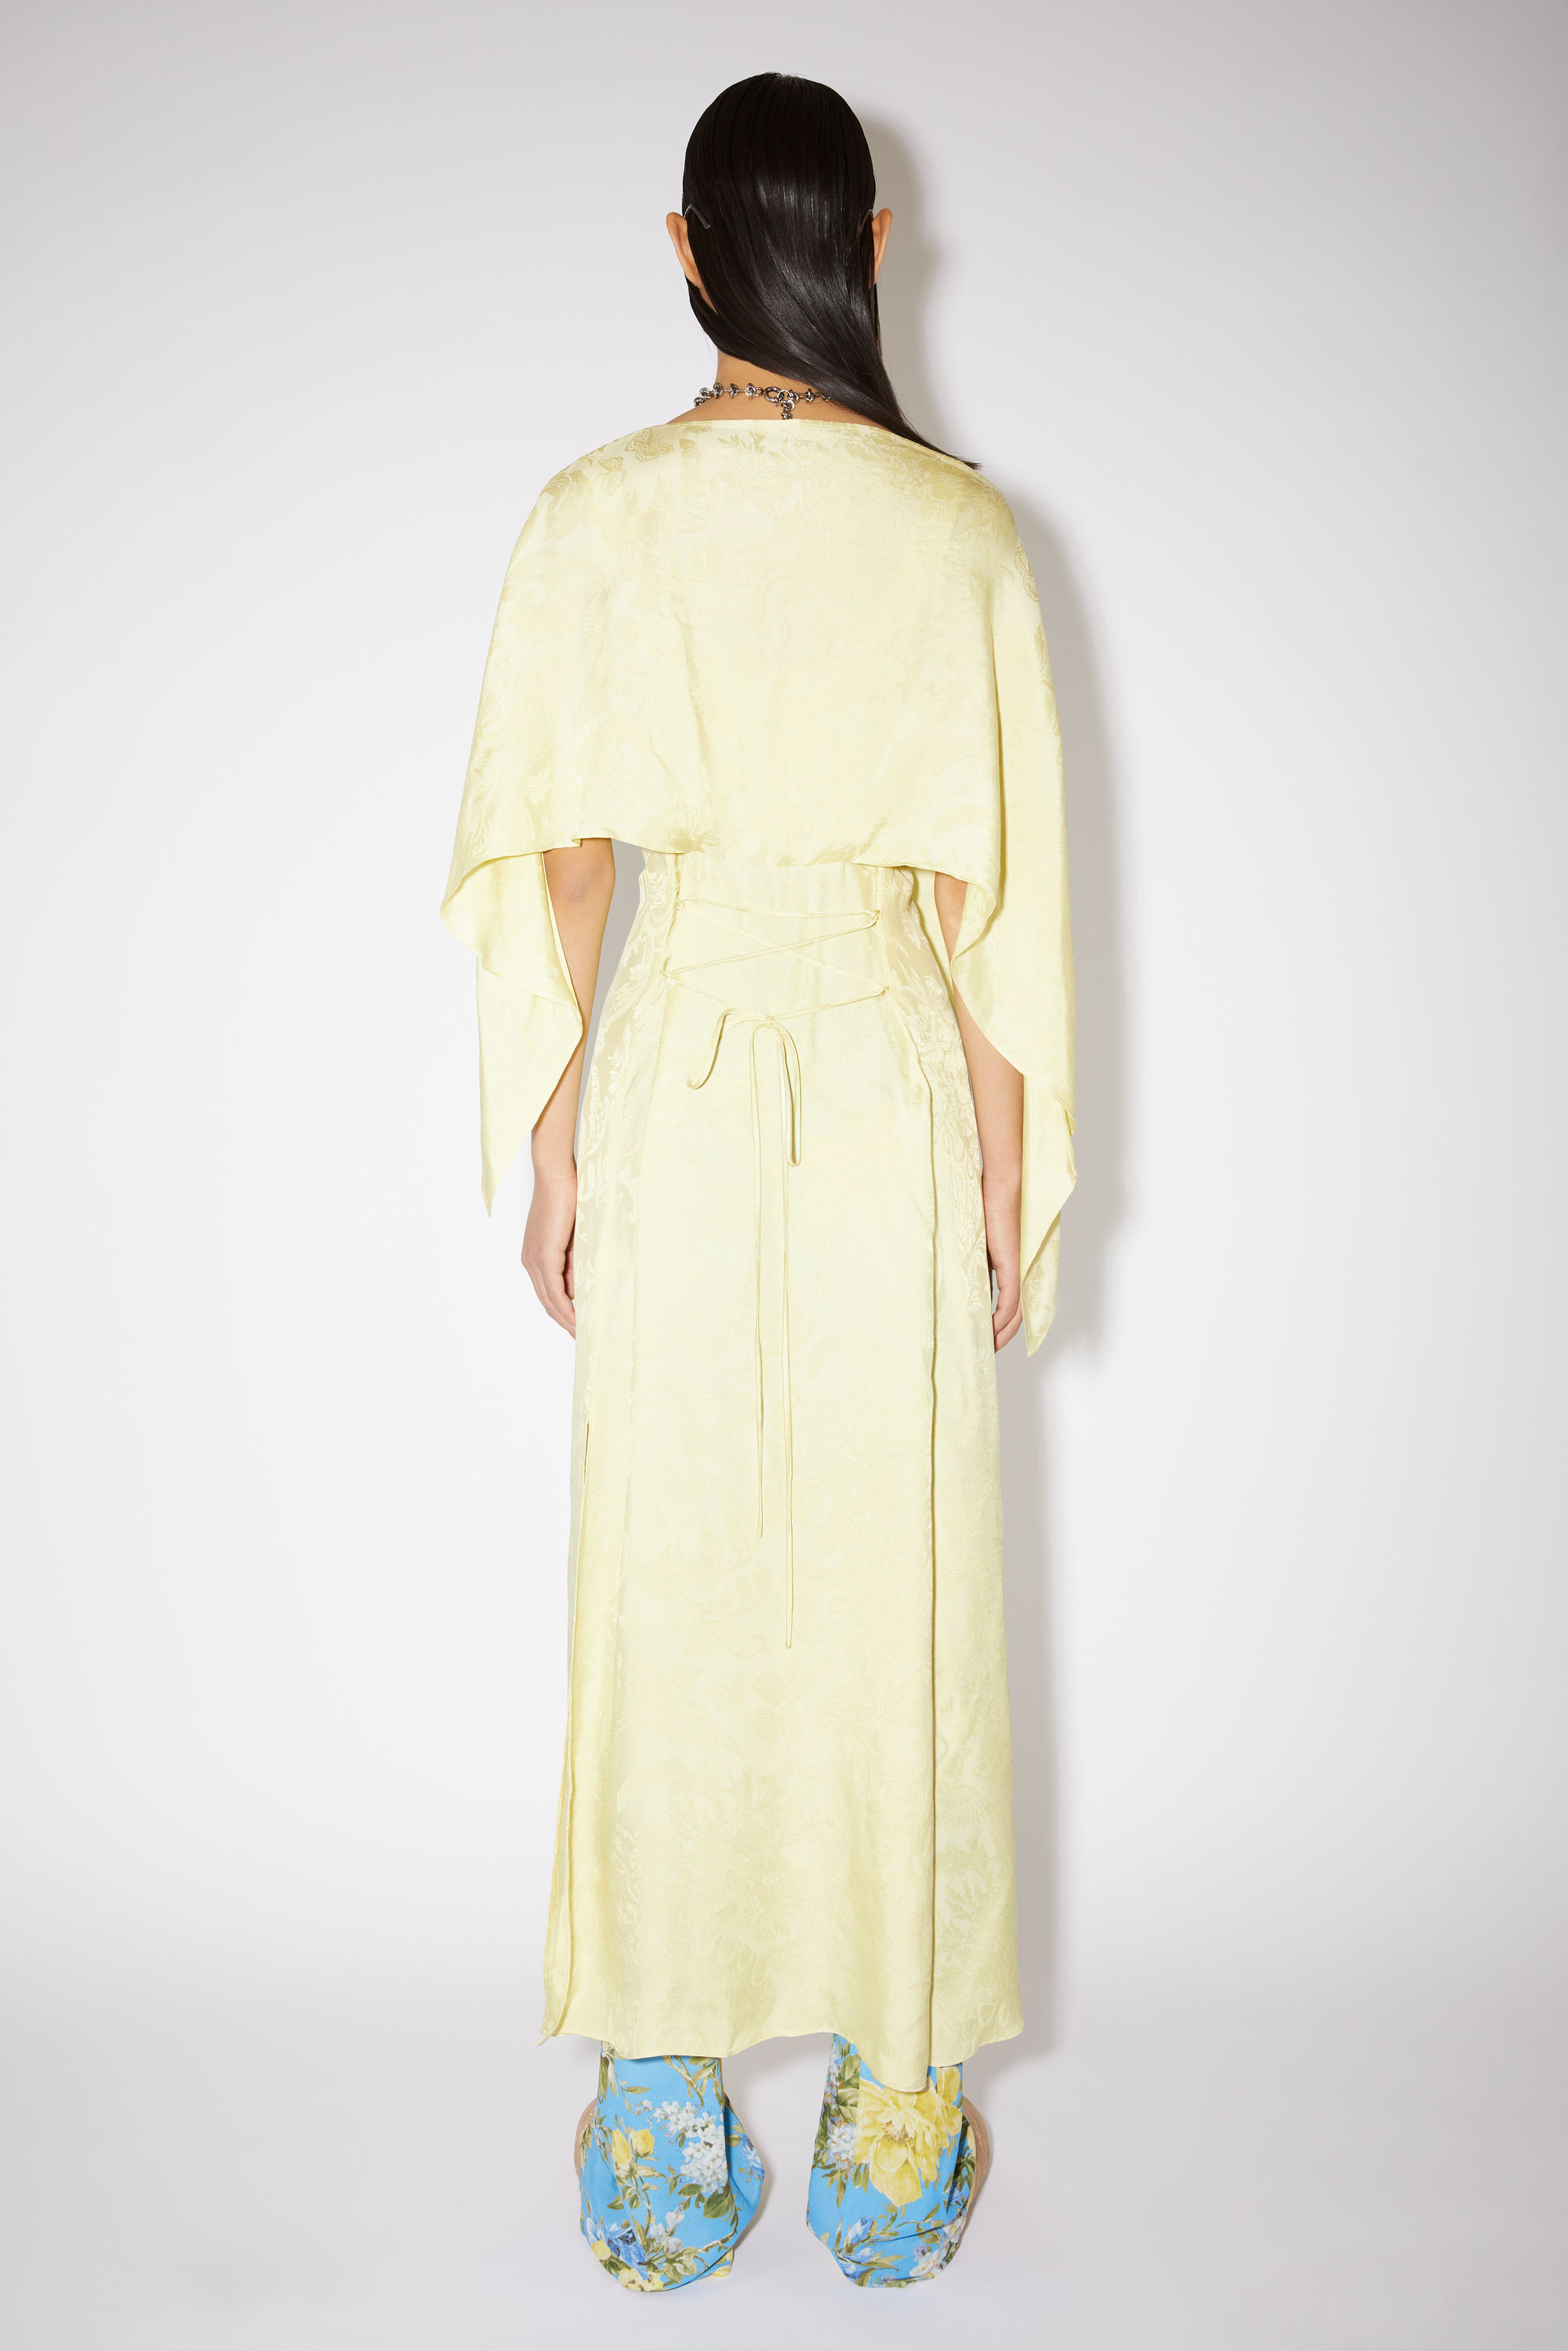 Womens Dresses Acne Studios Dresses Acne Studios Synthetic Layered Dress in Pale Yellow - Save 2% Natural 